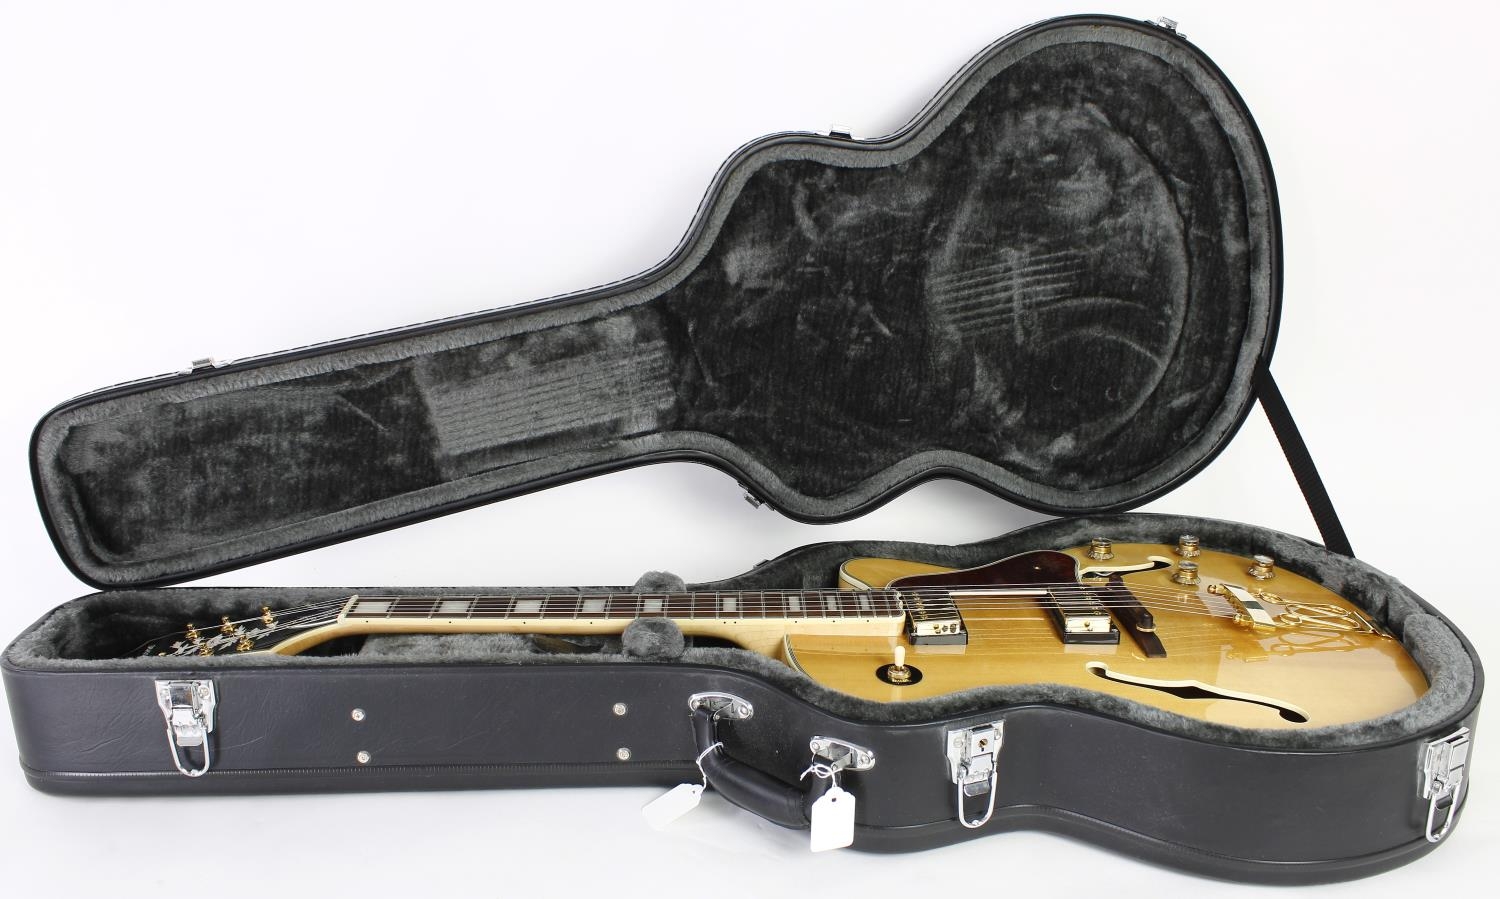 2015 Epiphone Joe Pass Emperor-II Pro hollow body electric guitar, made in Indonesia, ser. no. - Image 3 of 3